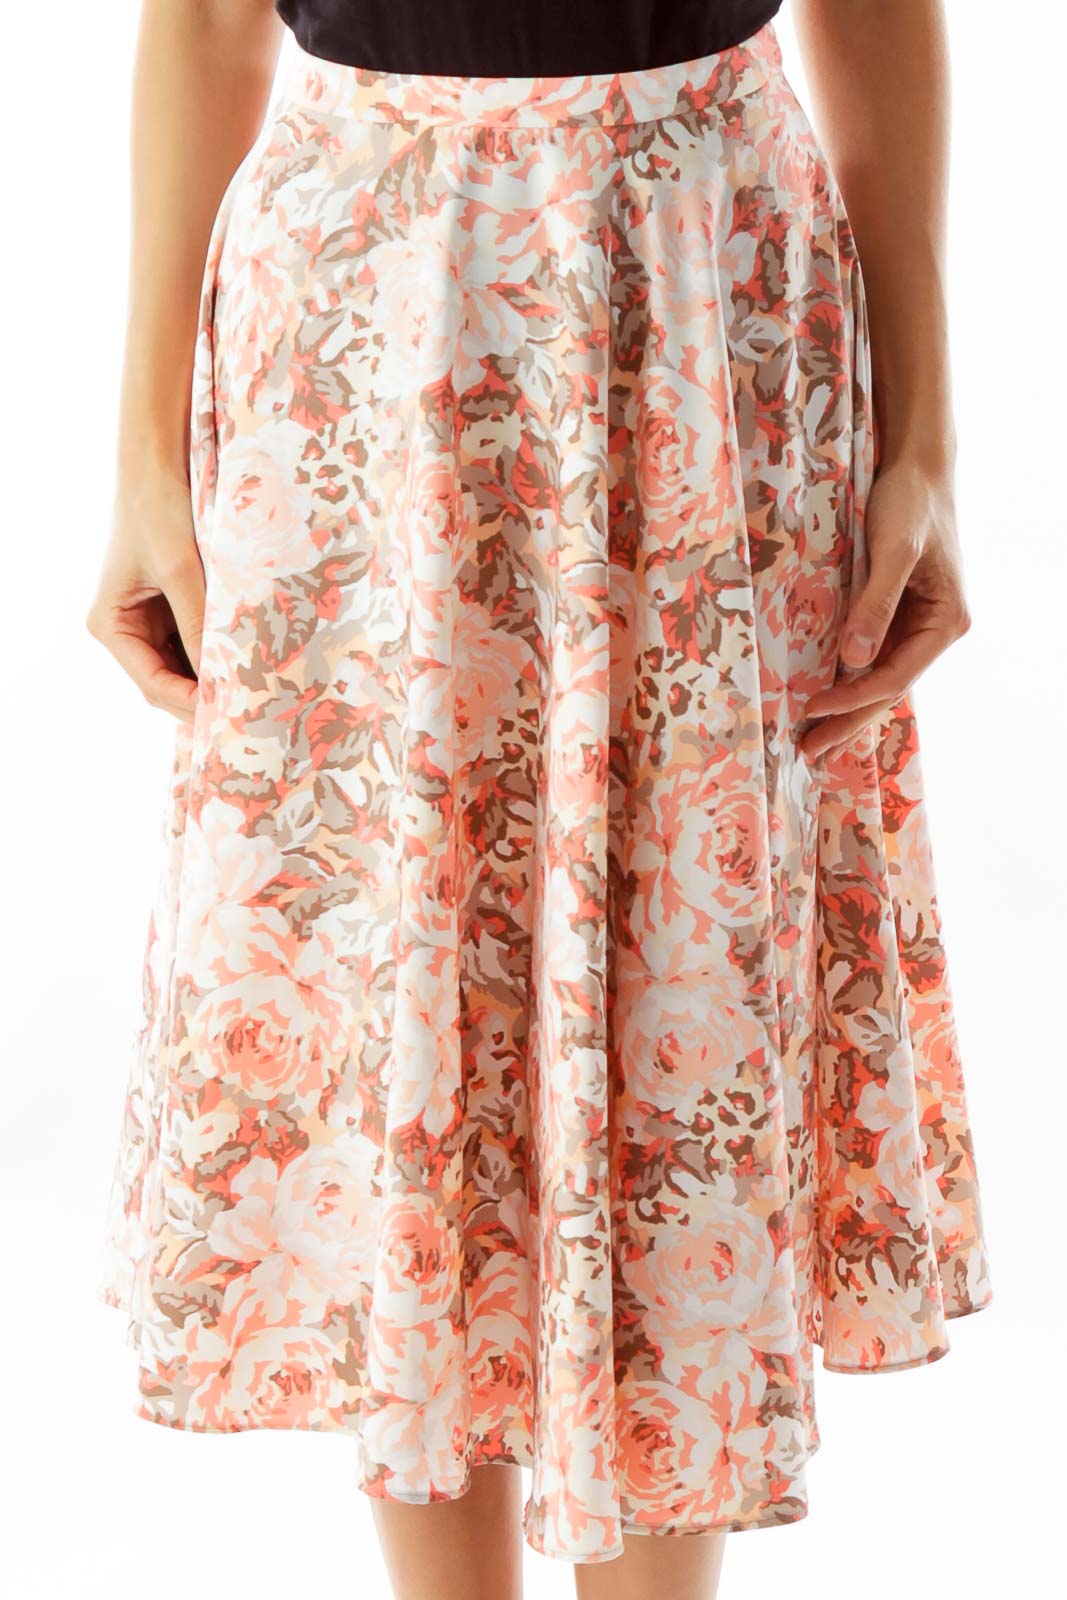 Peach Floral Skirt Front